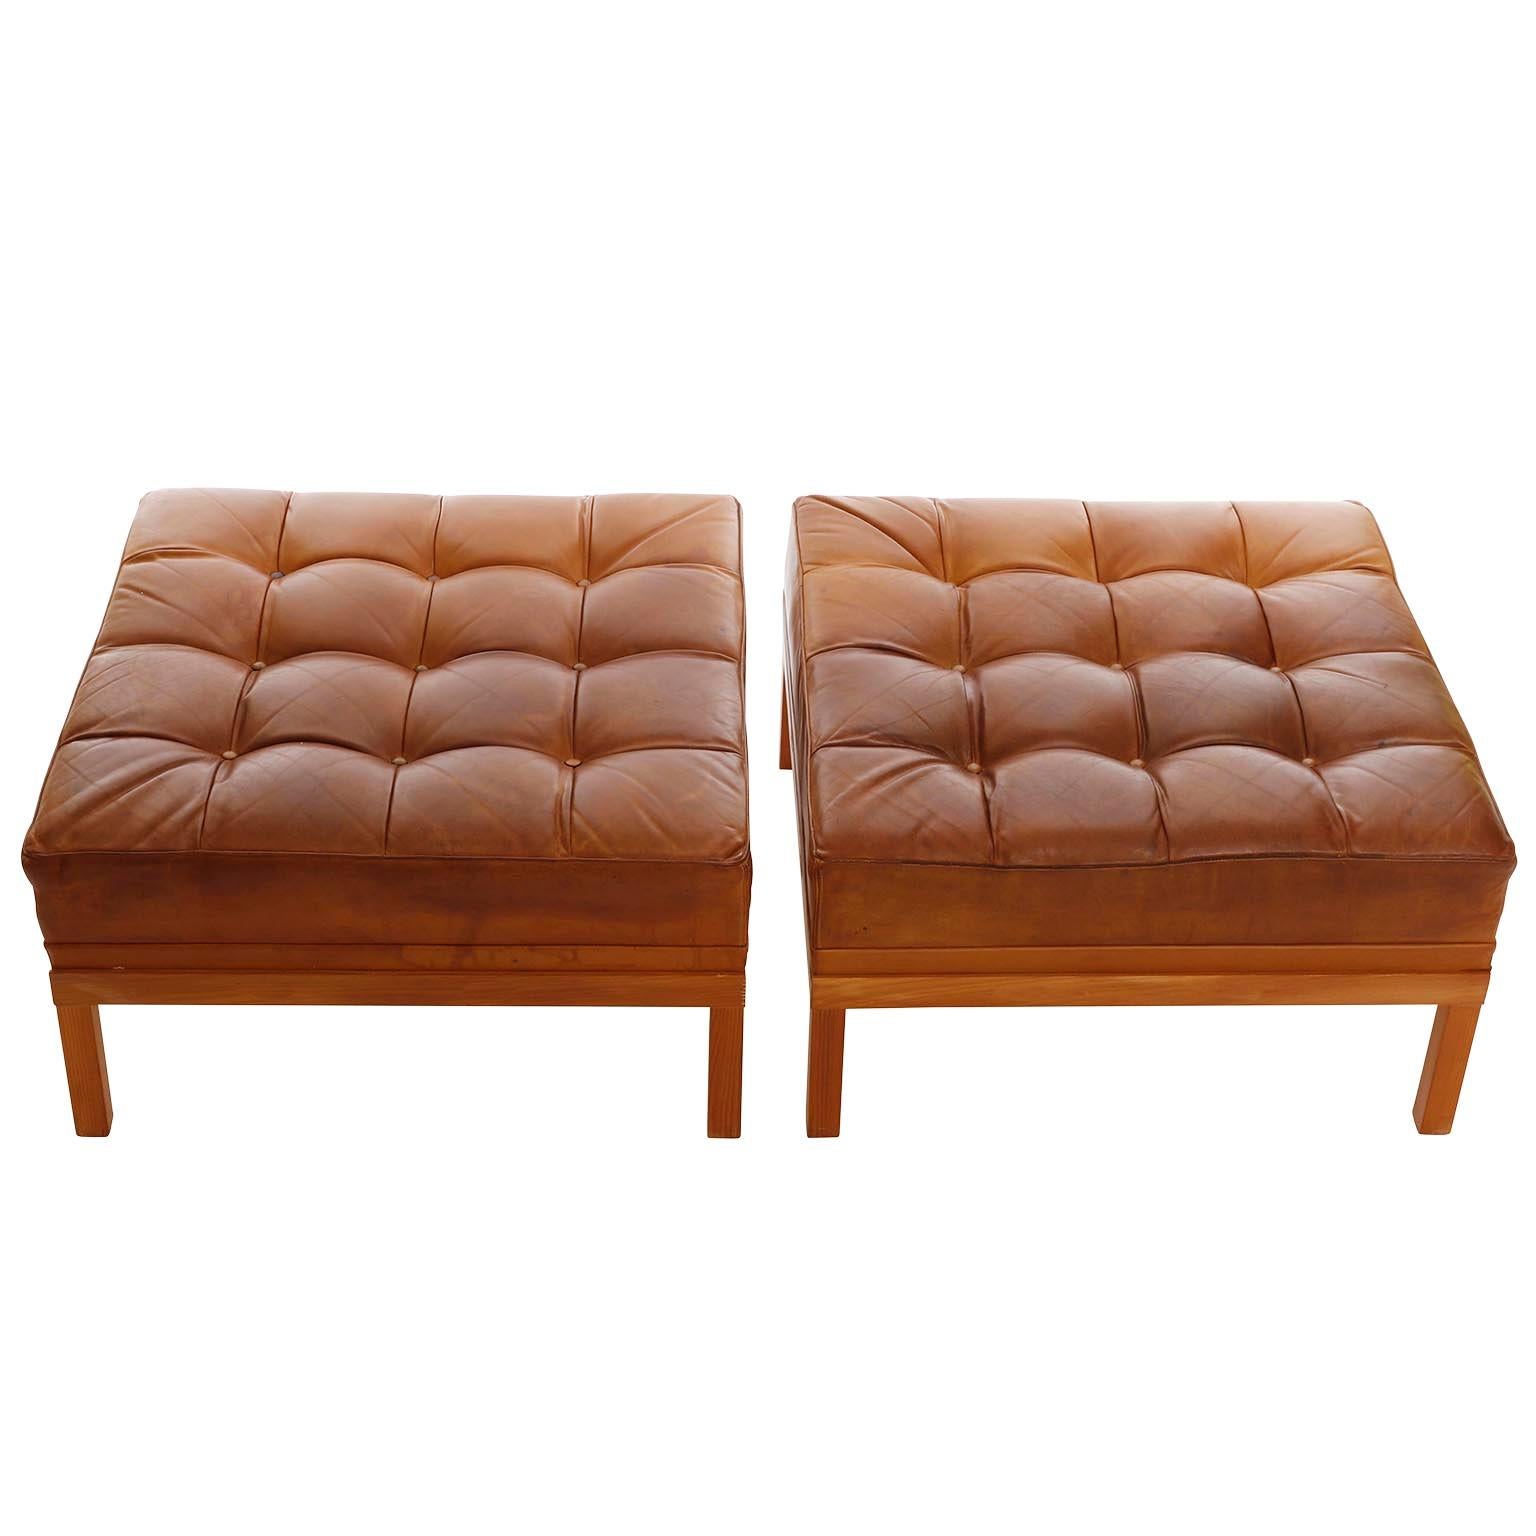 Mid-Century Modern Johannes Spalt 'Constanze' Chairs Stools, Patinated Cognac Leather Wood, 1960s